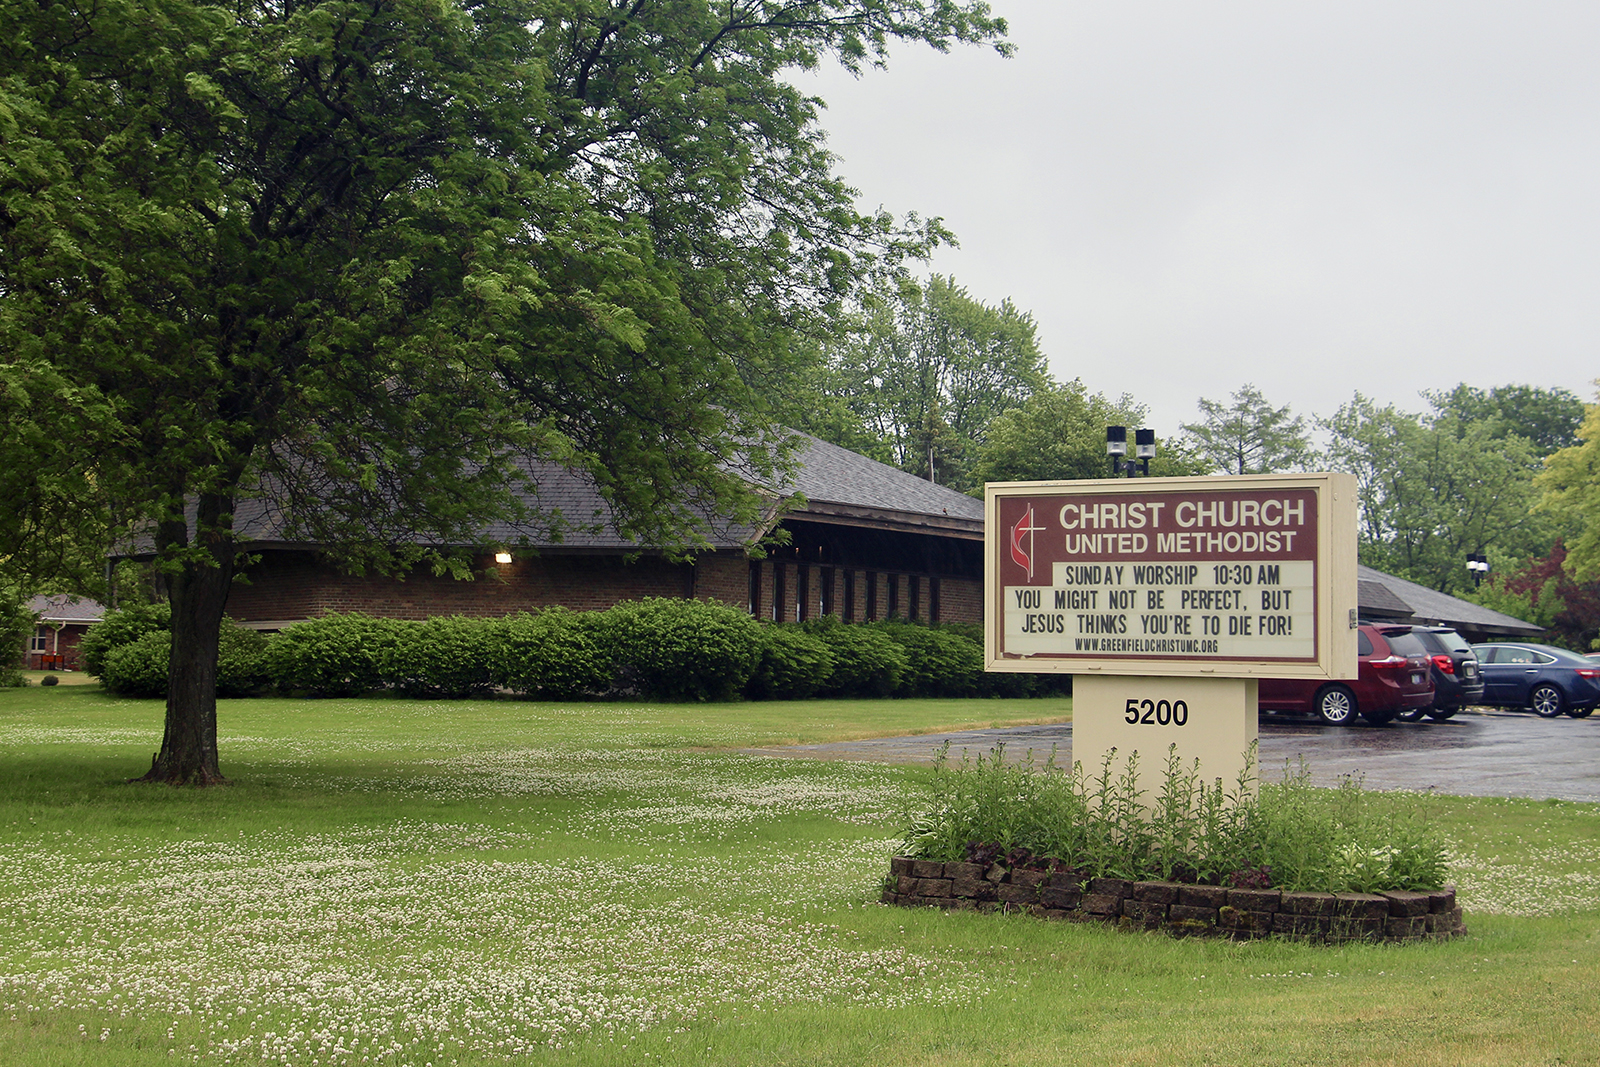 Christ United Methodist Church in Greenfield, Wisconsin. RNS photo by Emily McFarlan Miller